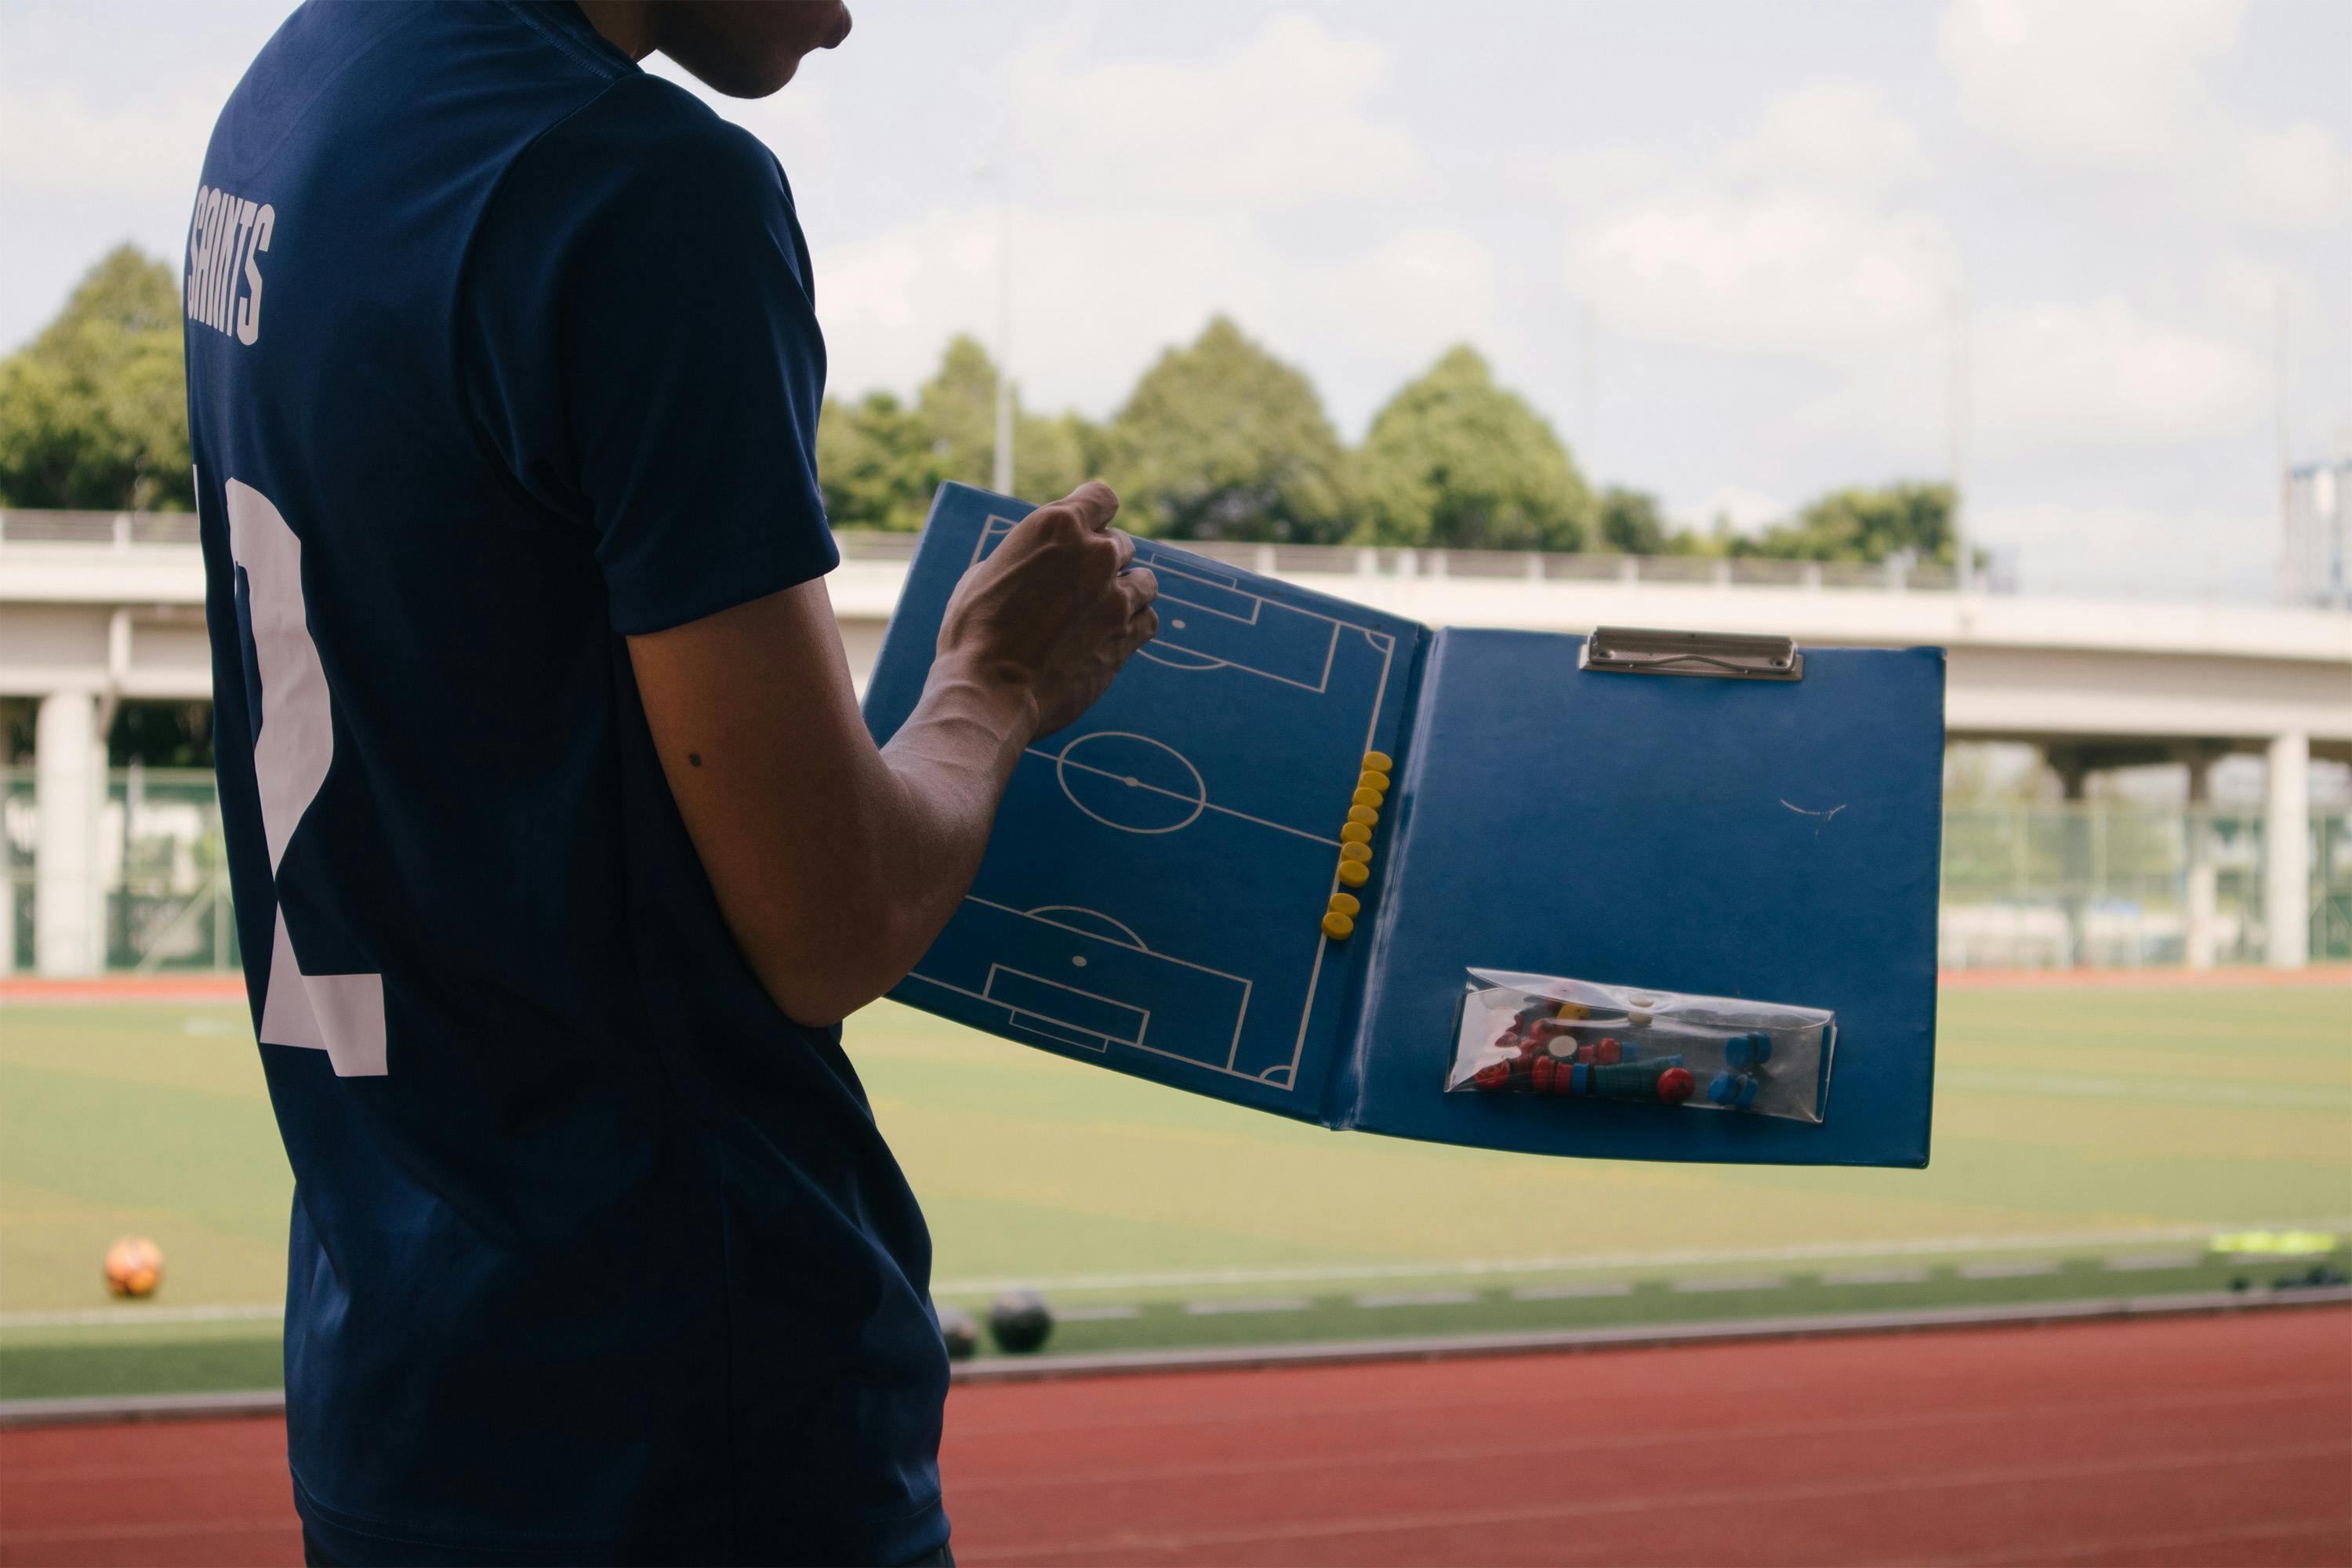 A man holding a soccer pitch playbook